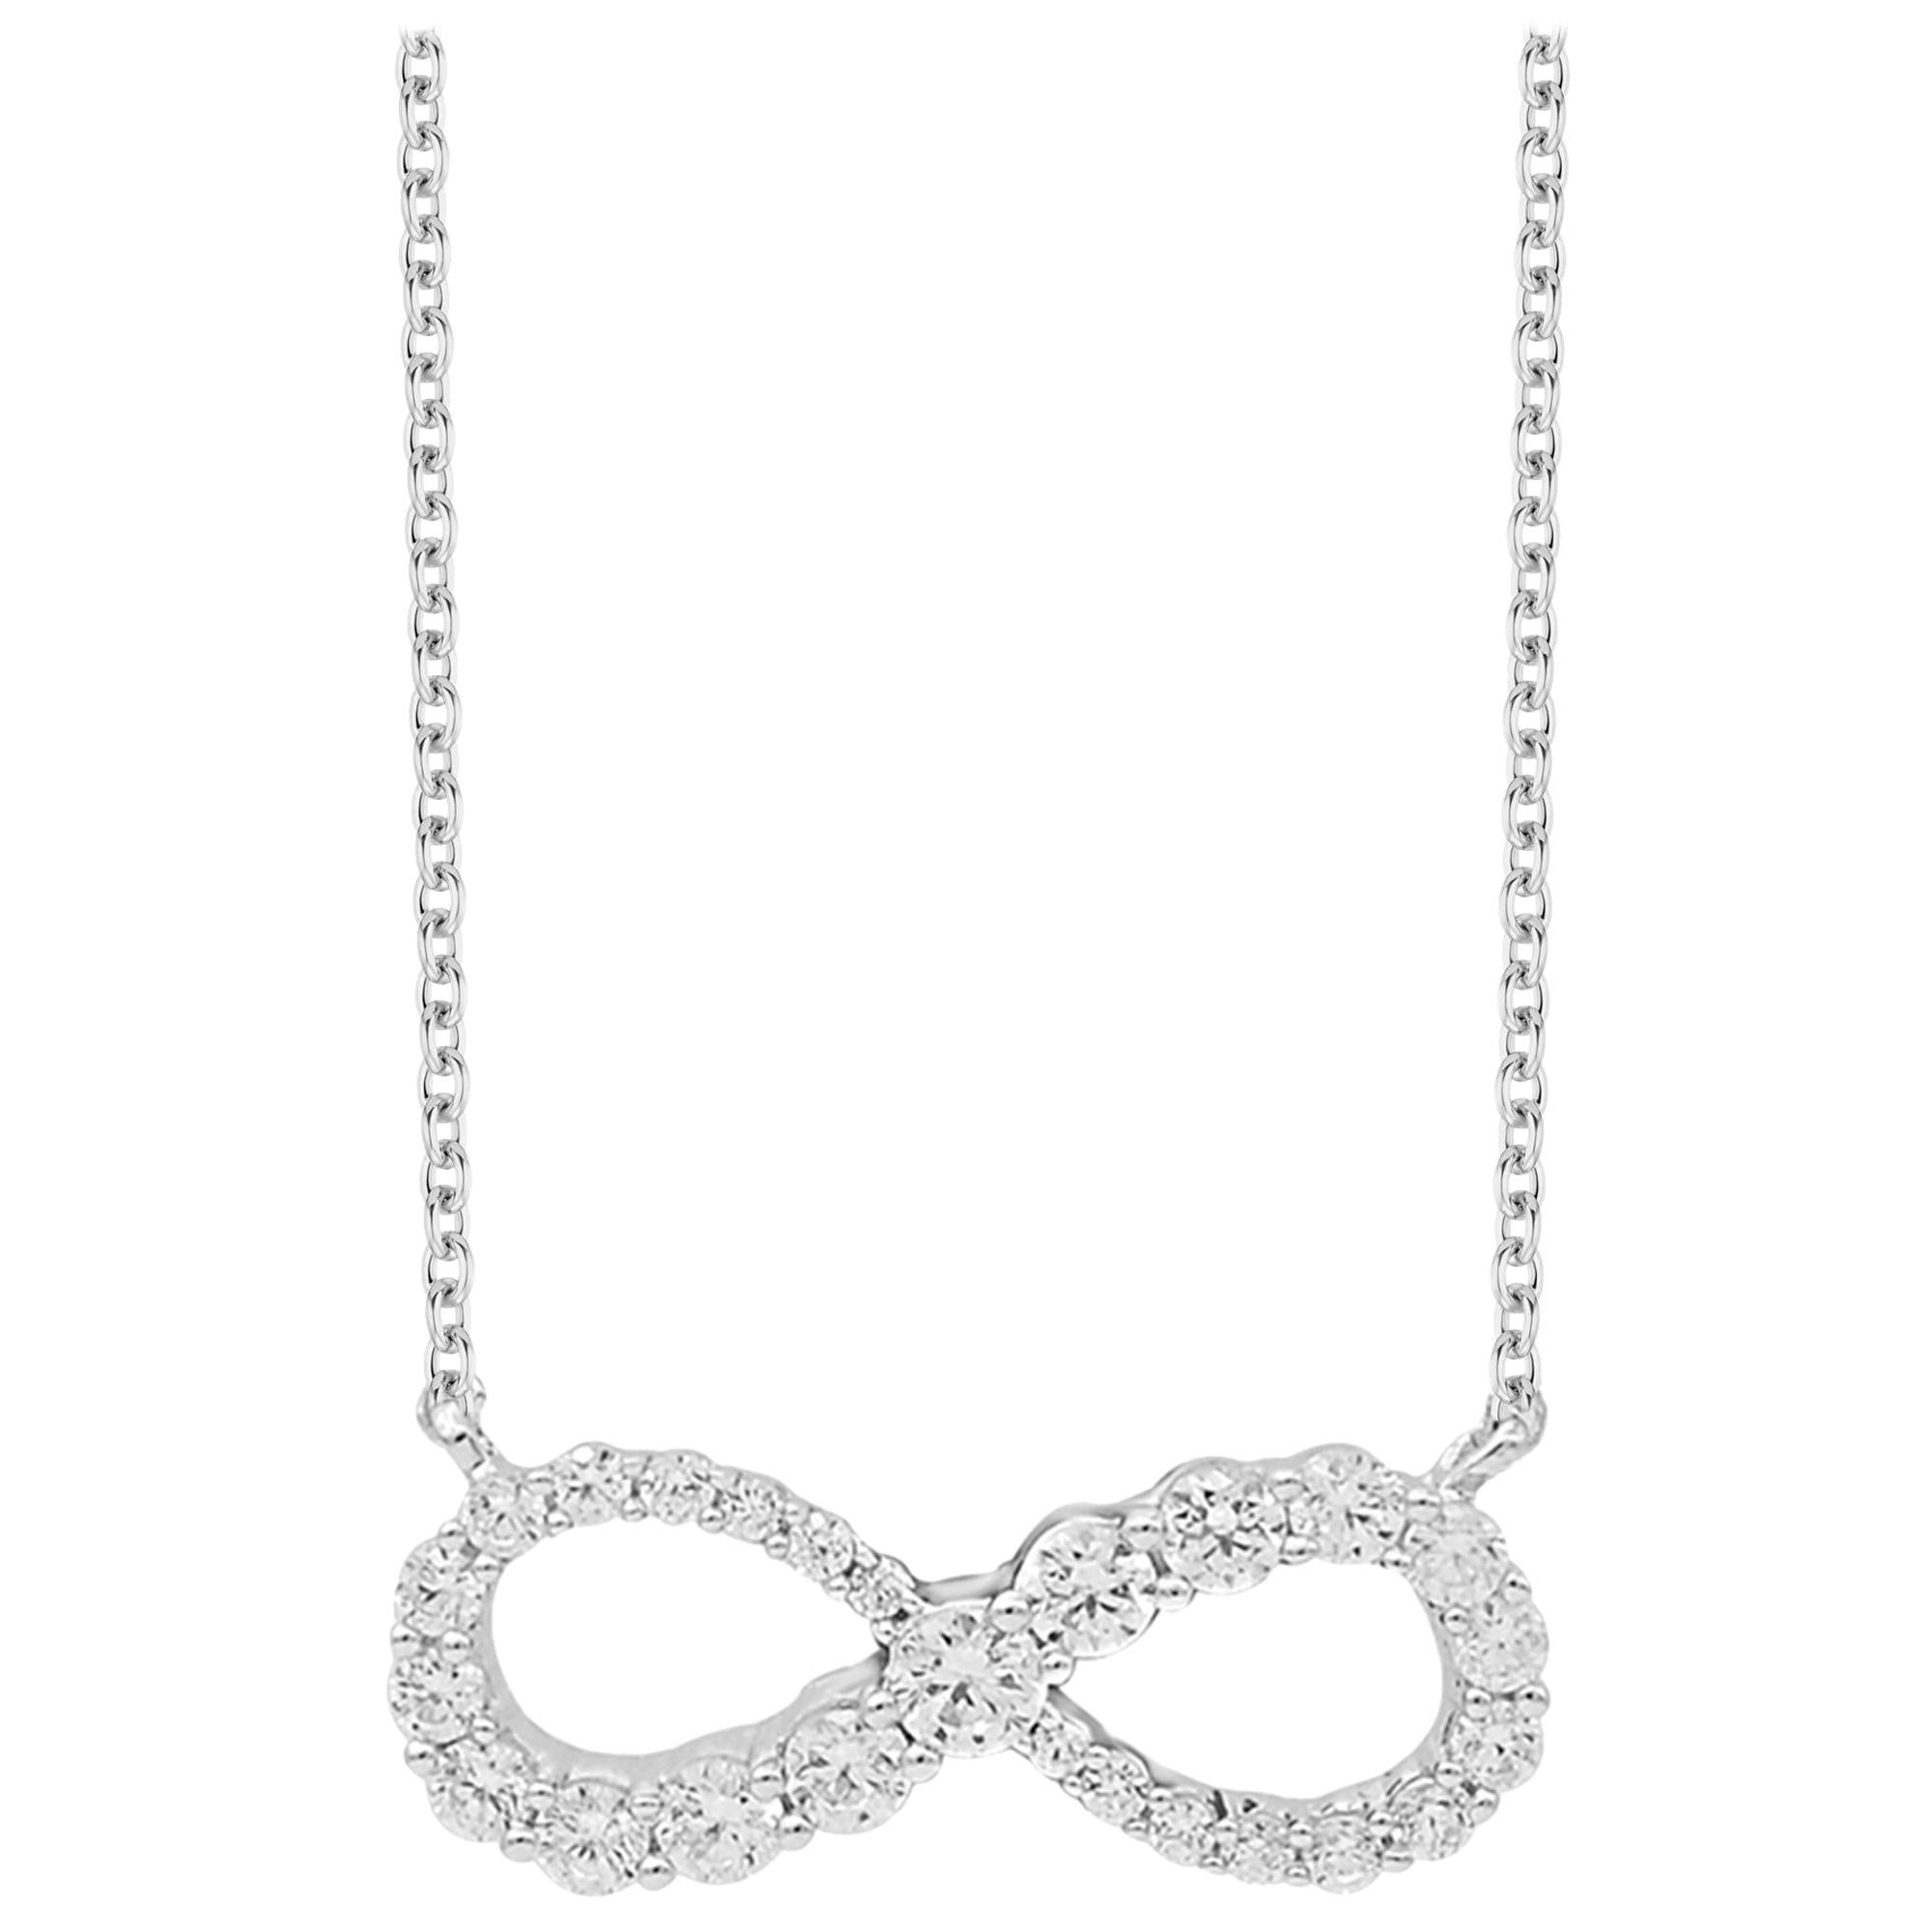 TJD 0.50 Carat Diamond 14 Karat White Gold Infinity Pendant with 18 inch chain For Sale